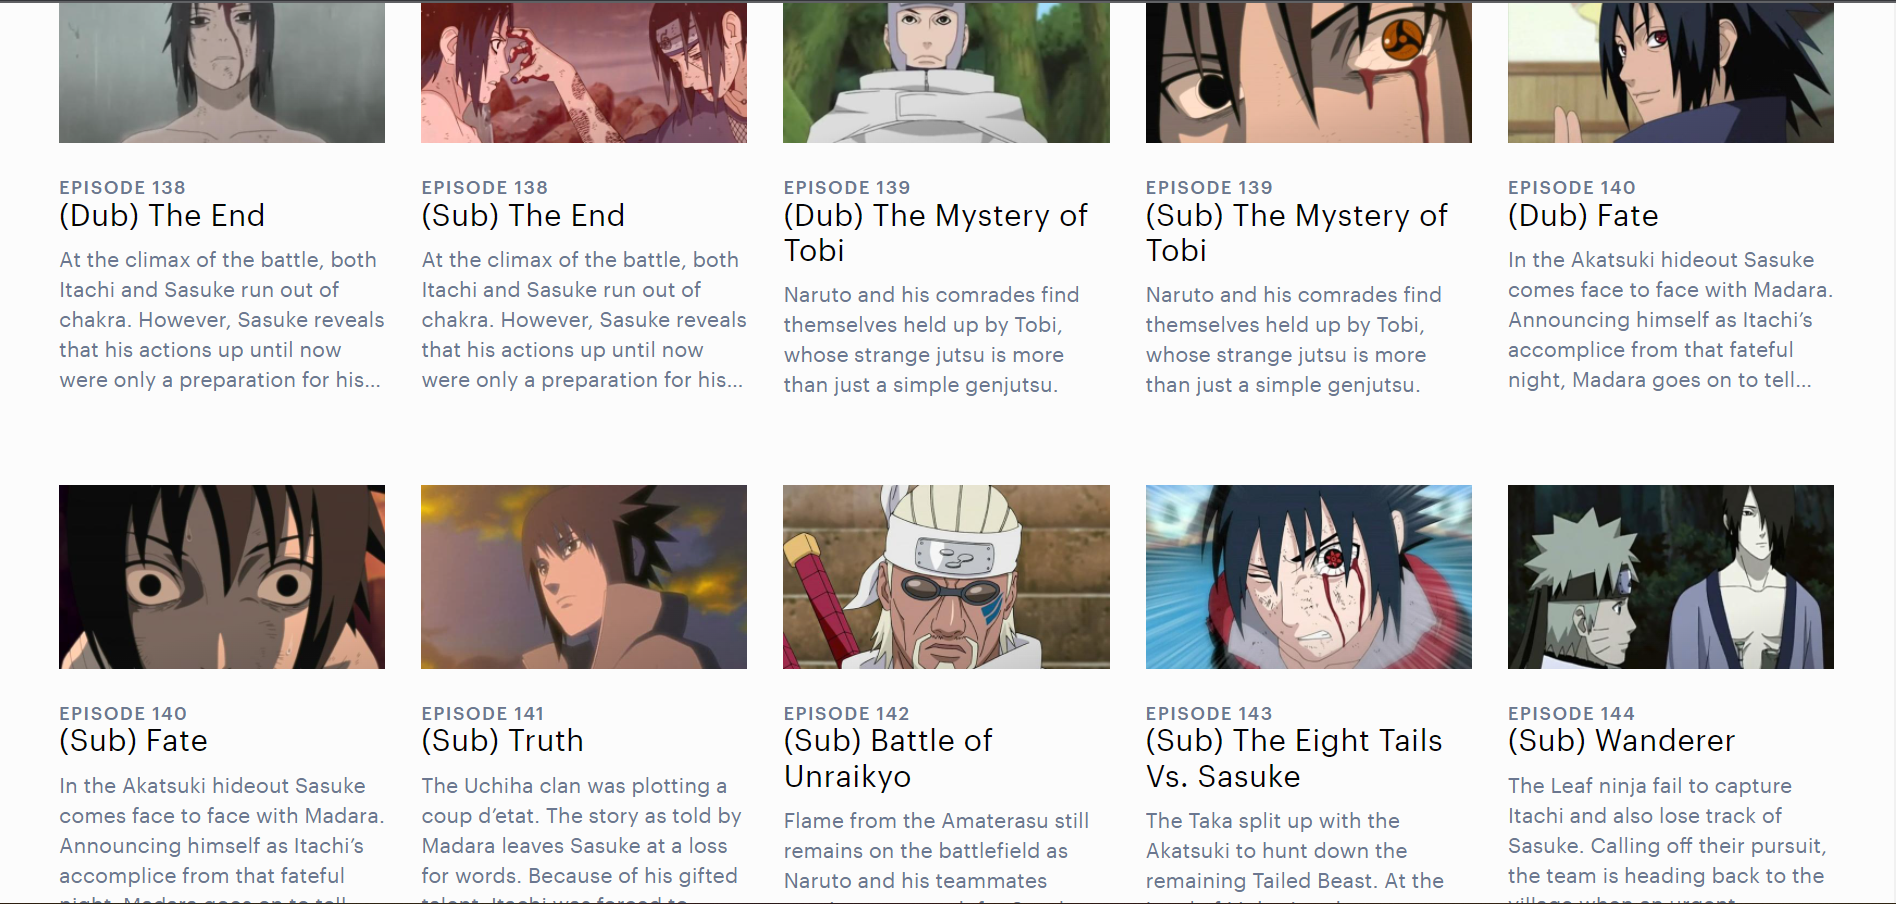 Does Hulu have all Naruto Shippuden dubbed